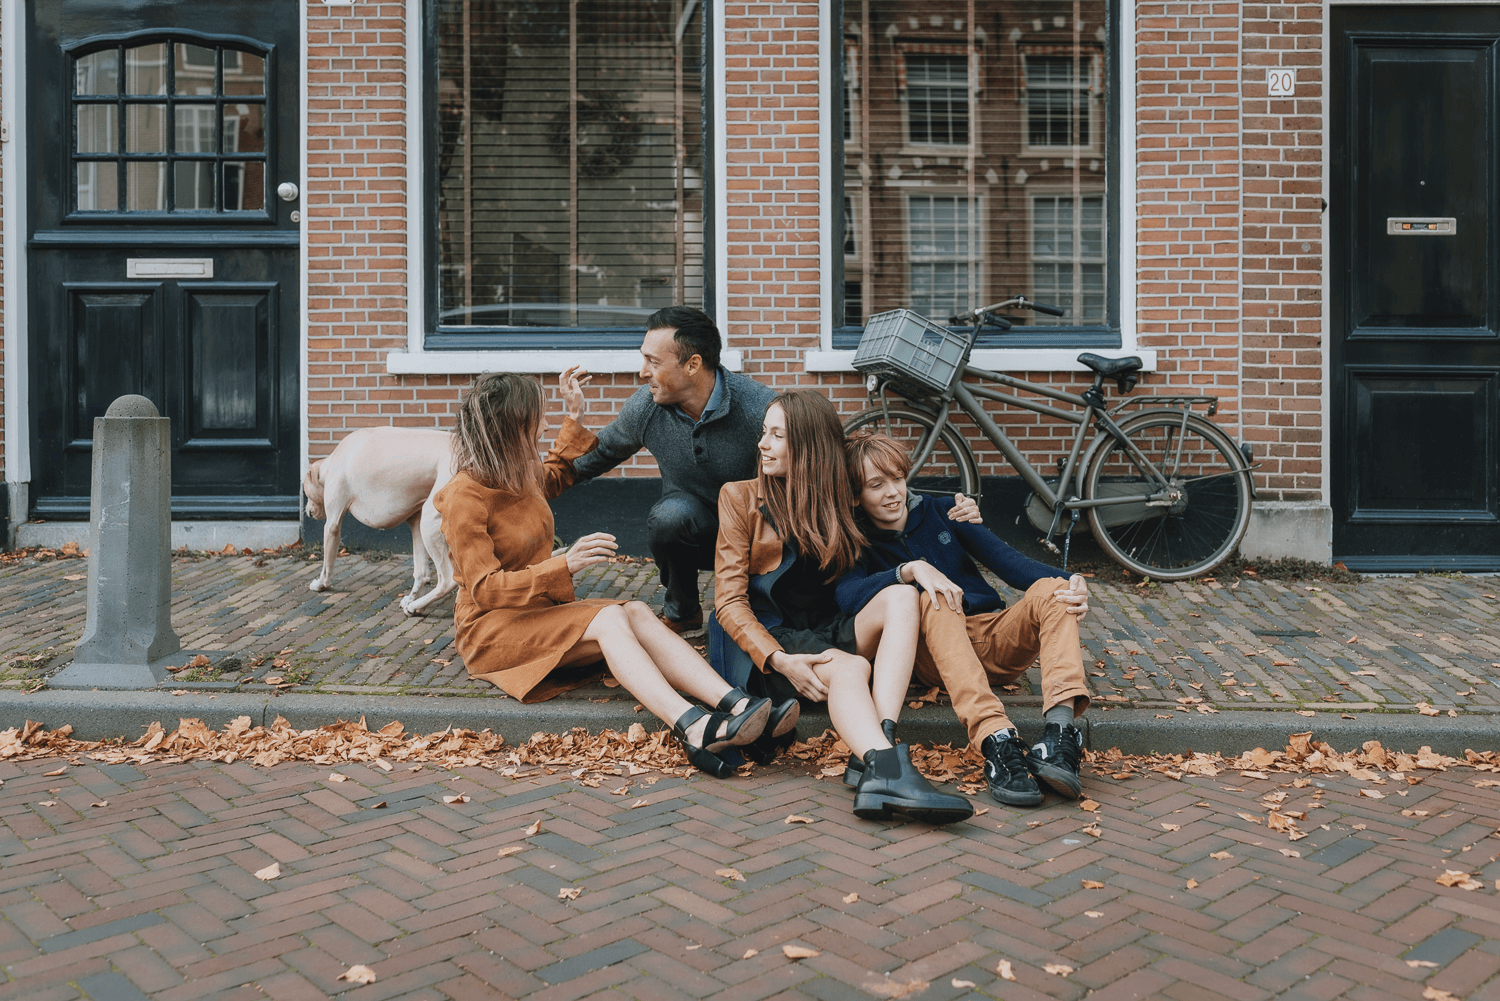 Gift Card Photoshoot in Haarlem-Amsterdam by Vicky McLachlan Photography | Bolster Family_11